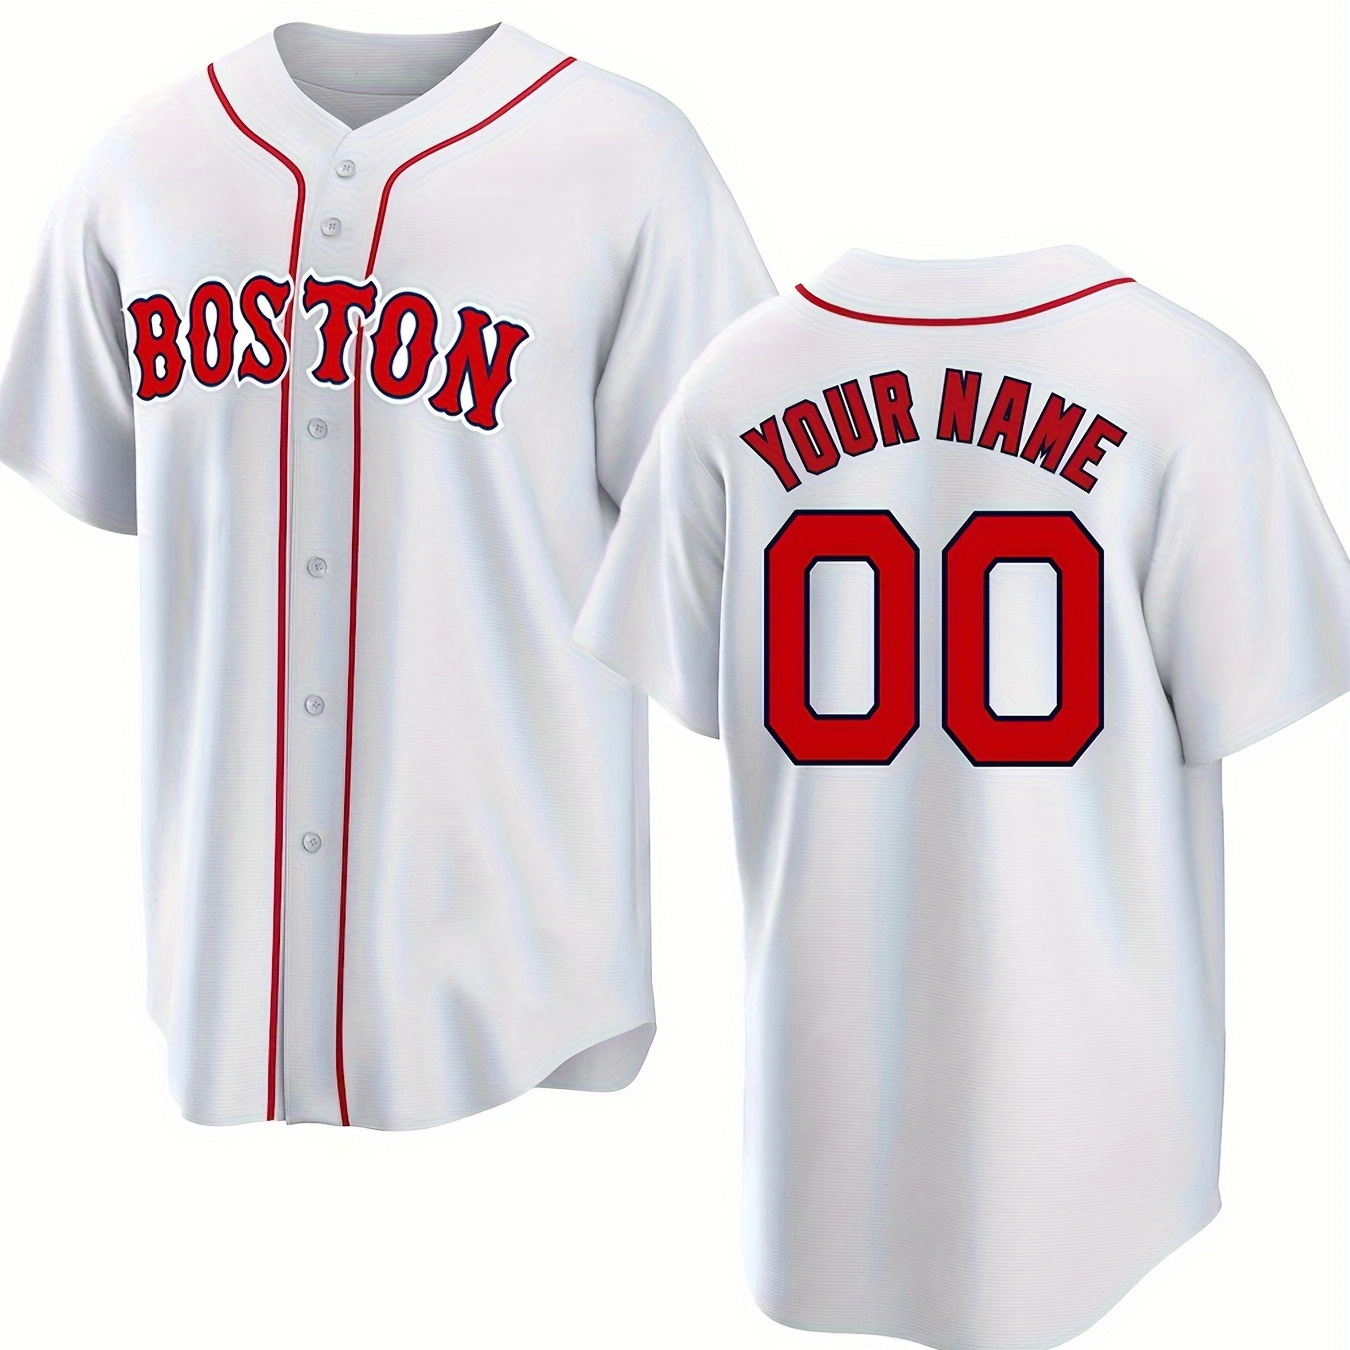 

Men's Personalized Custom Name & Numbers Graphic Print Baseball Jersey T-shirt, Competition Party Training Tees